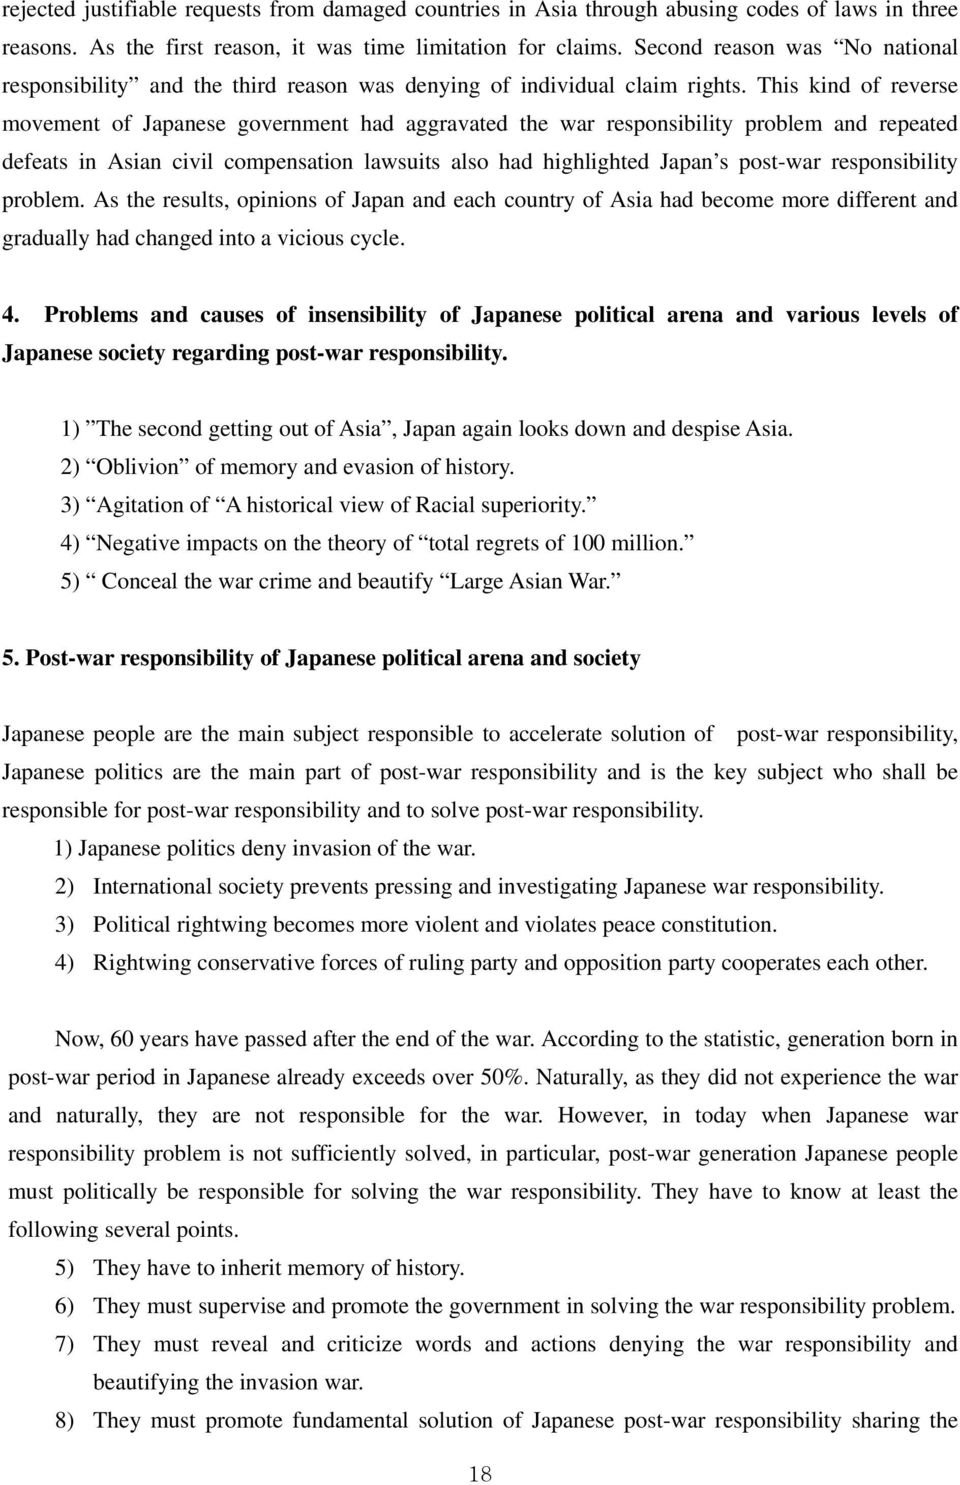 This kind of reverse movement of Japanese government had aggravated the war responsibility problem and repeated defeats in Asian civil compensation lawsuits also had highlighted Japan s post-war